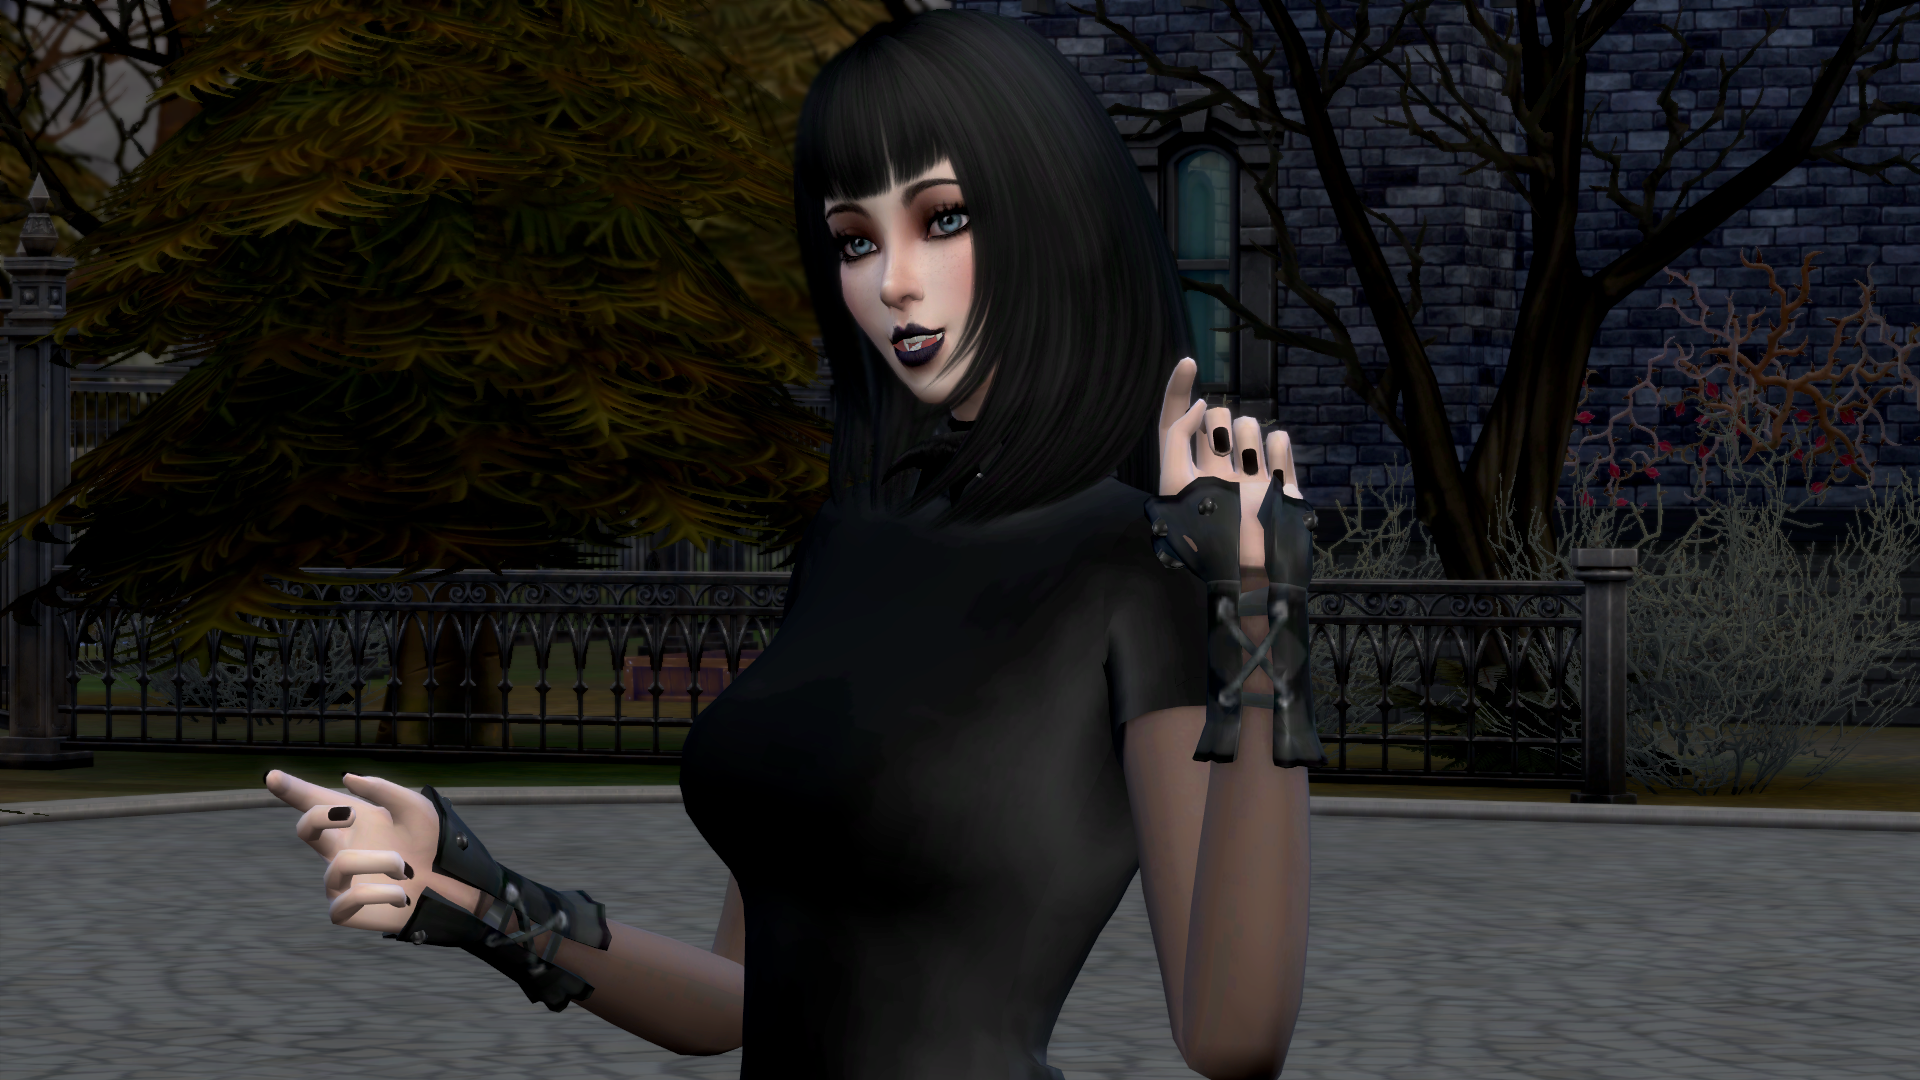 Share Your Female Sims! - Page 162 - The Sims 4 General Discussion ...